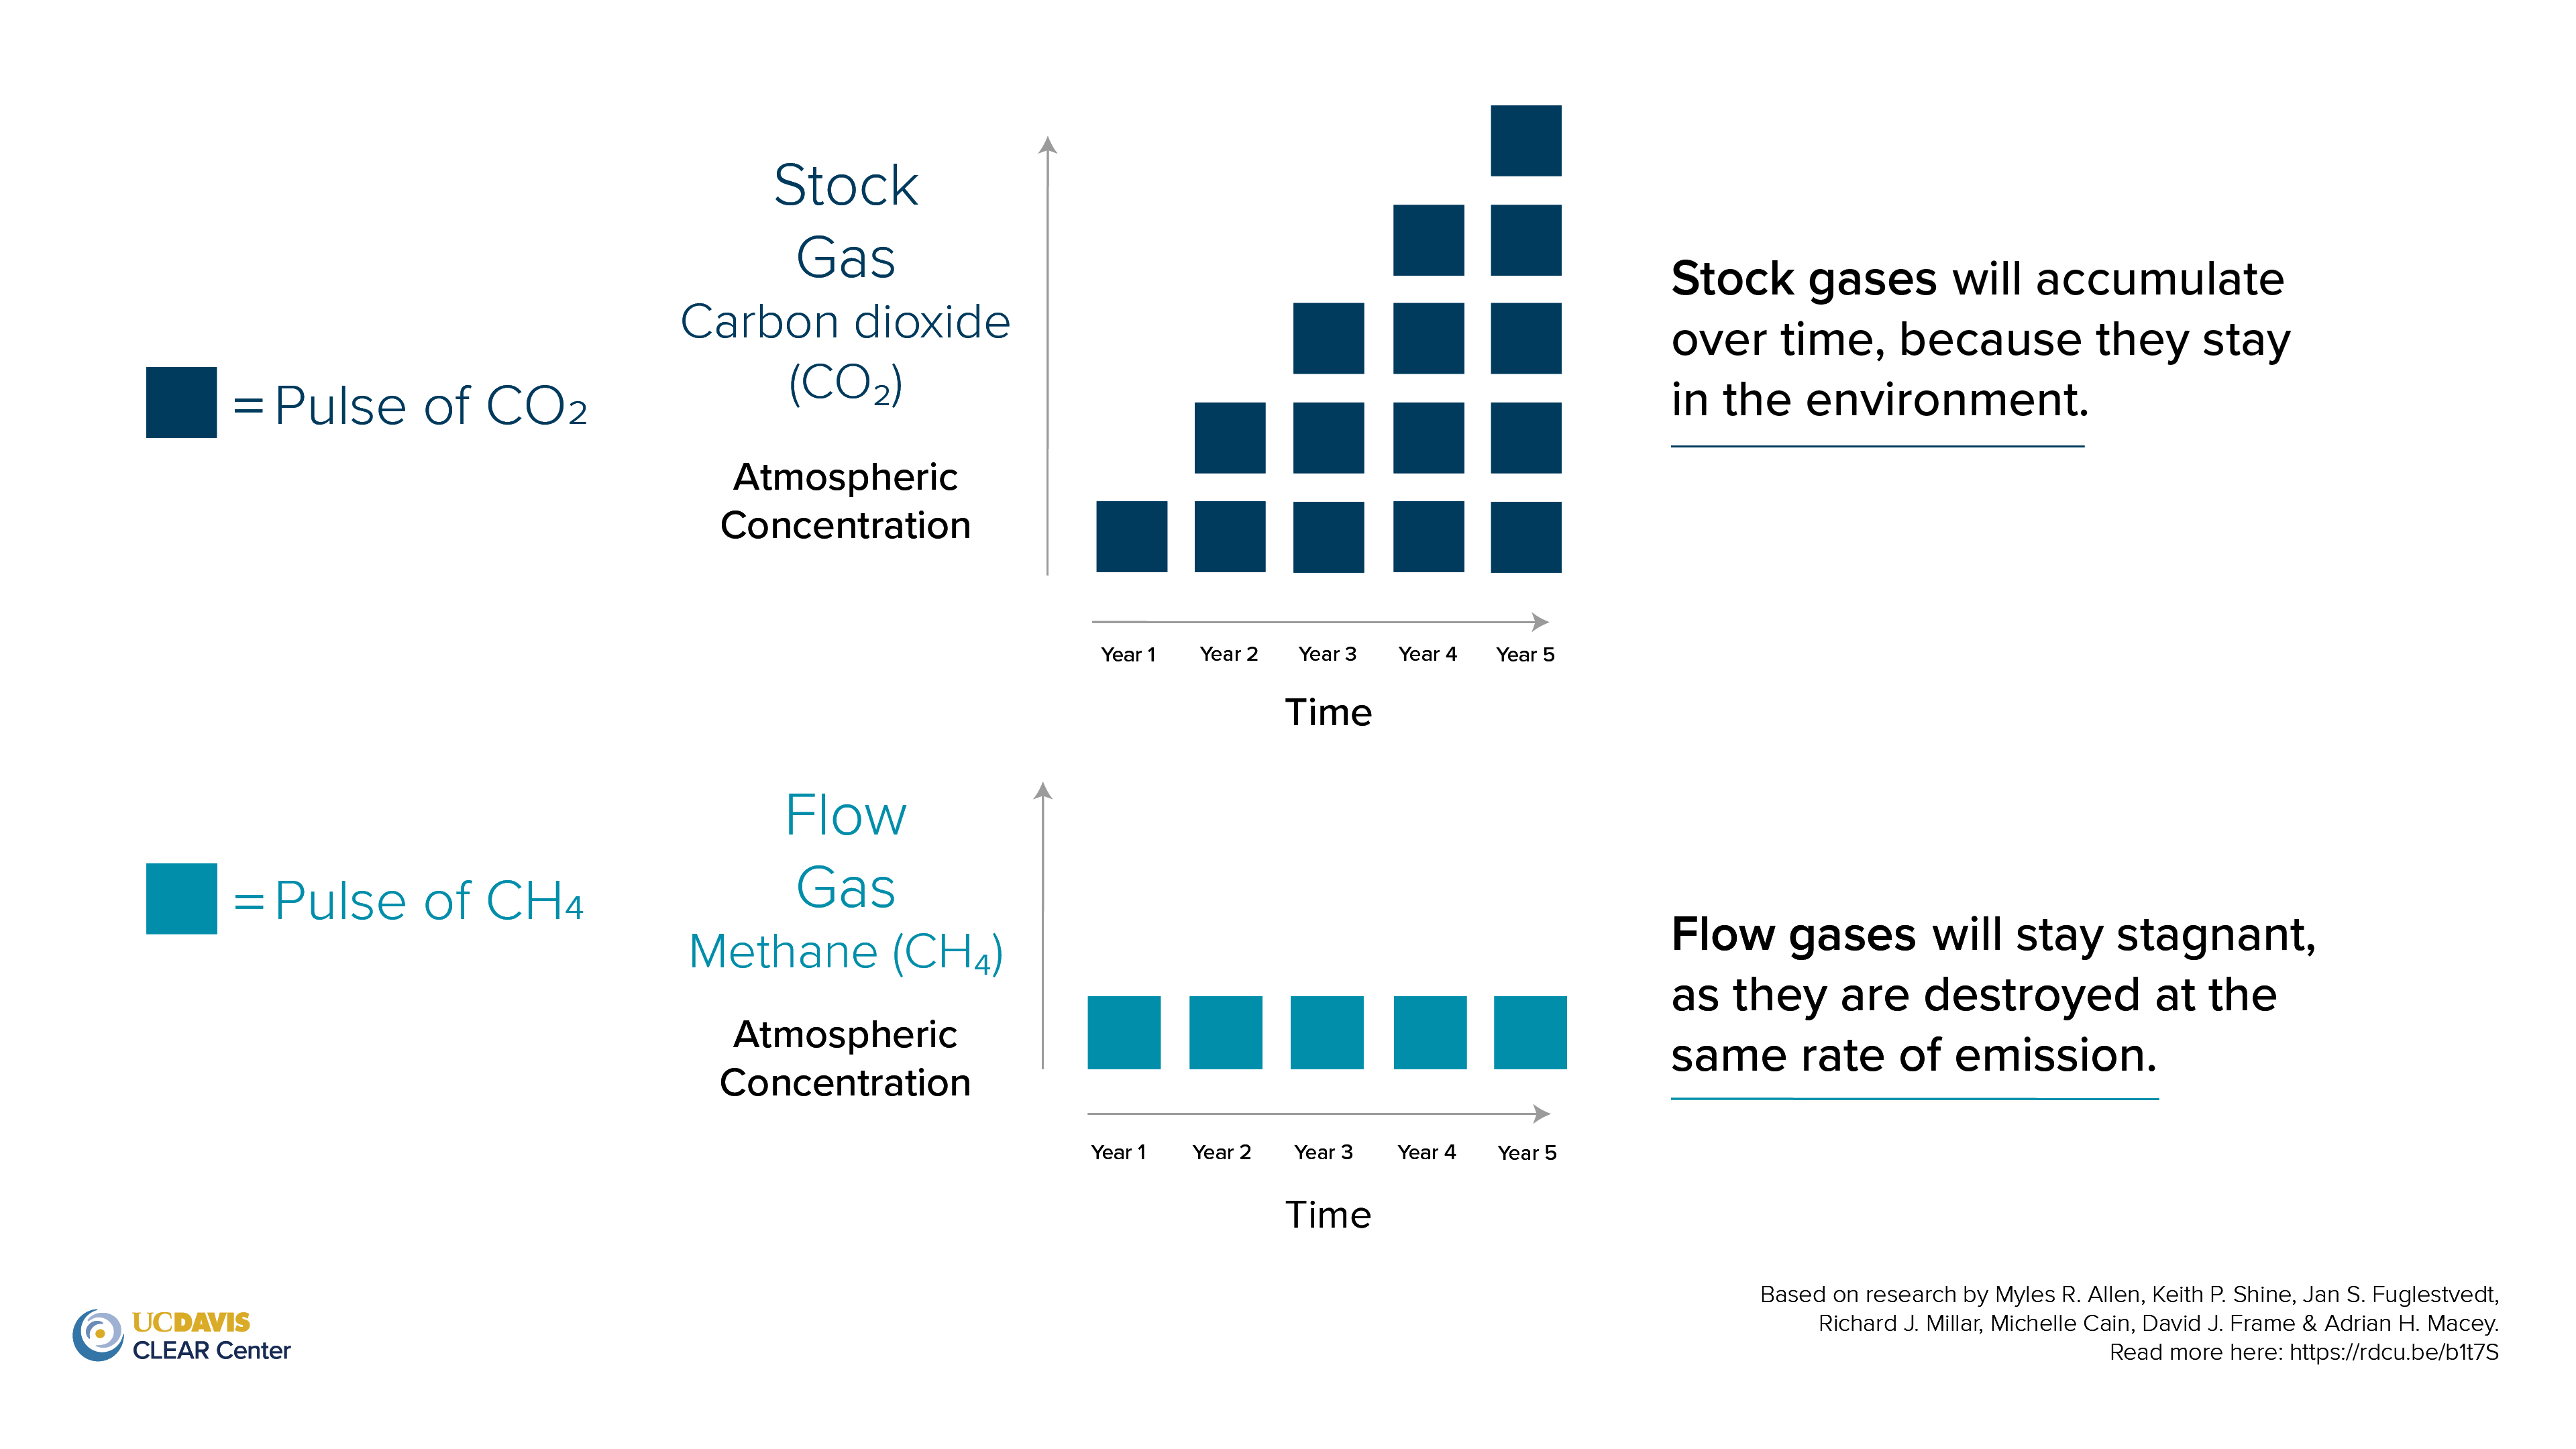 CLEAR Center Stock vs. Flow graphic